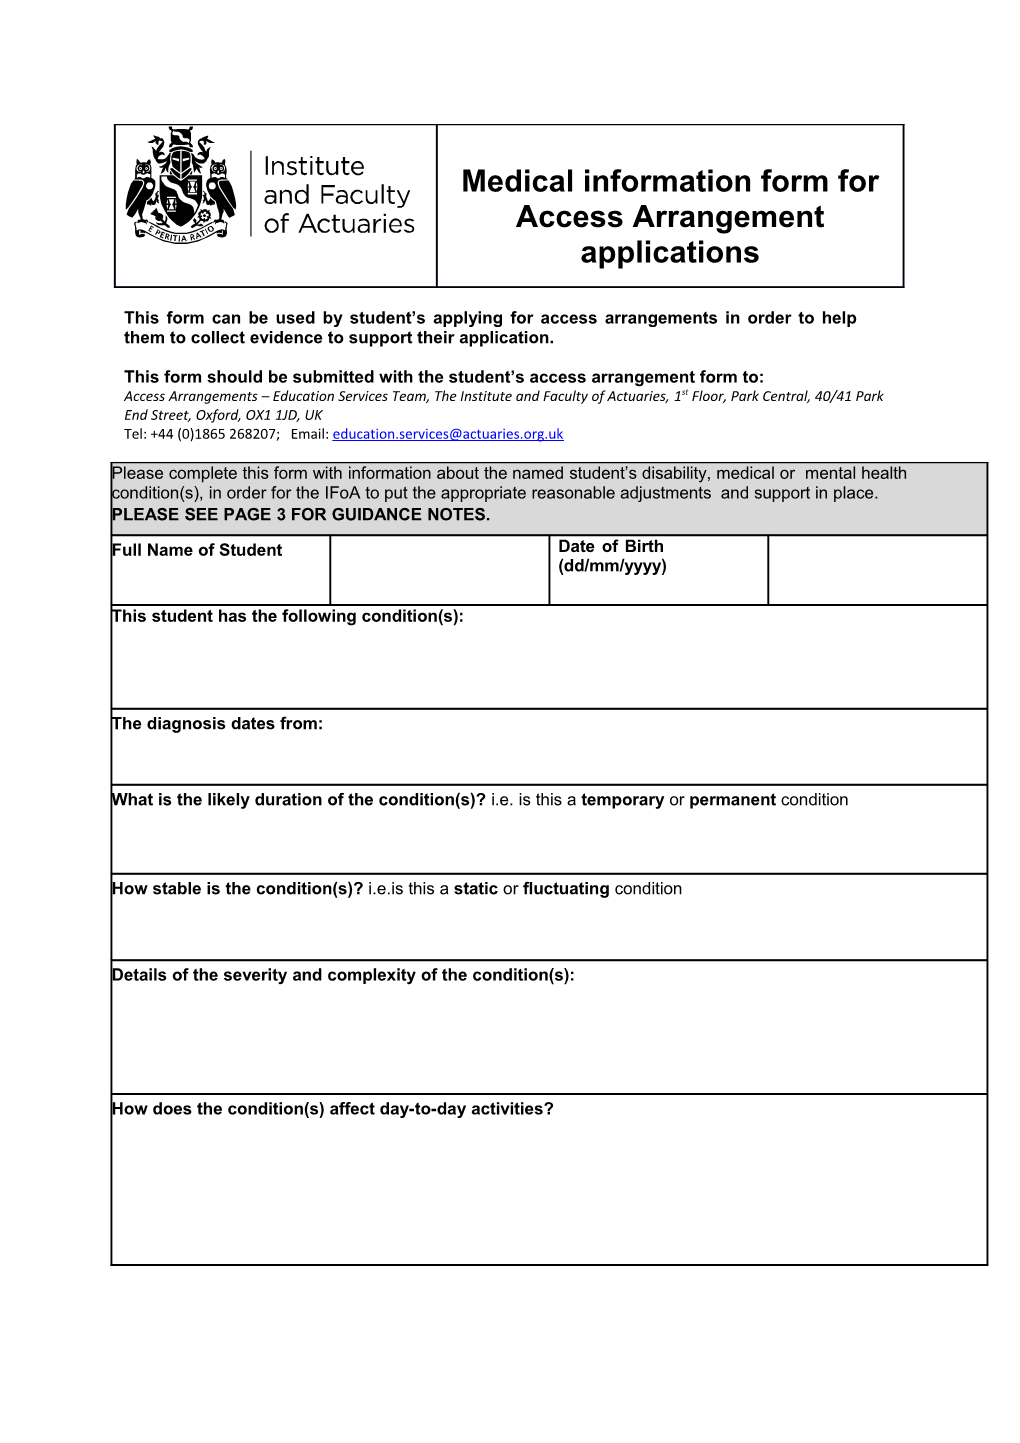 This Form Should Be Submitted with the Student S Access Arrangement Form To